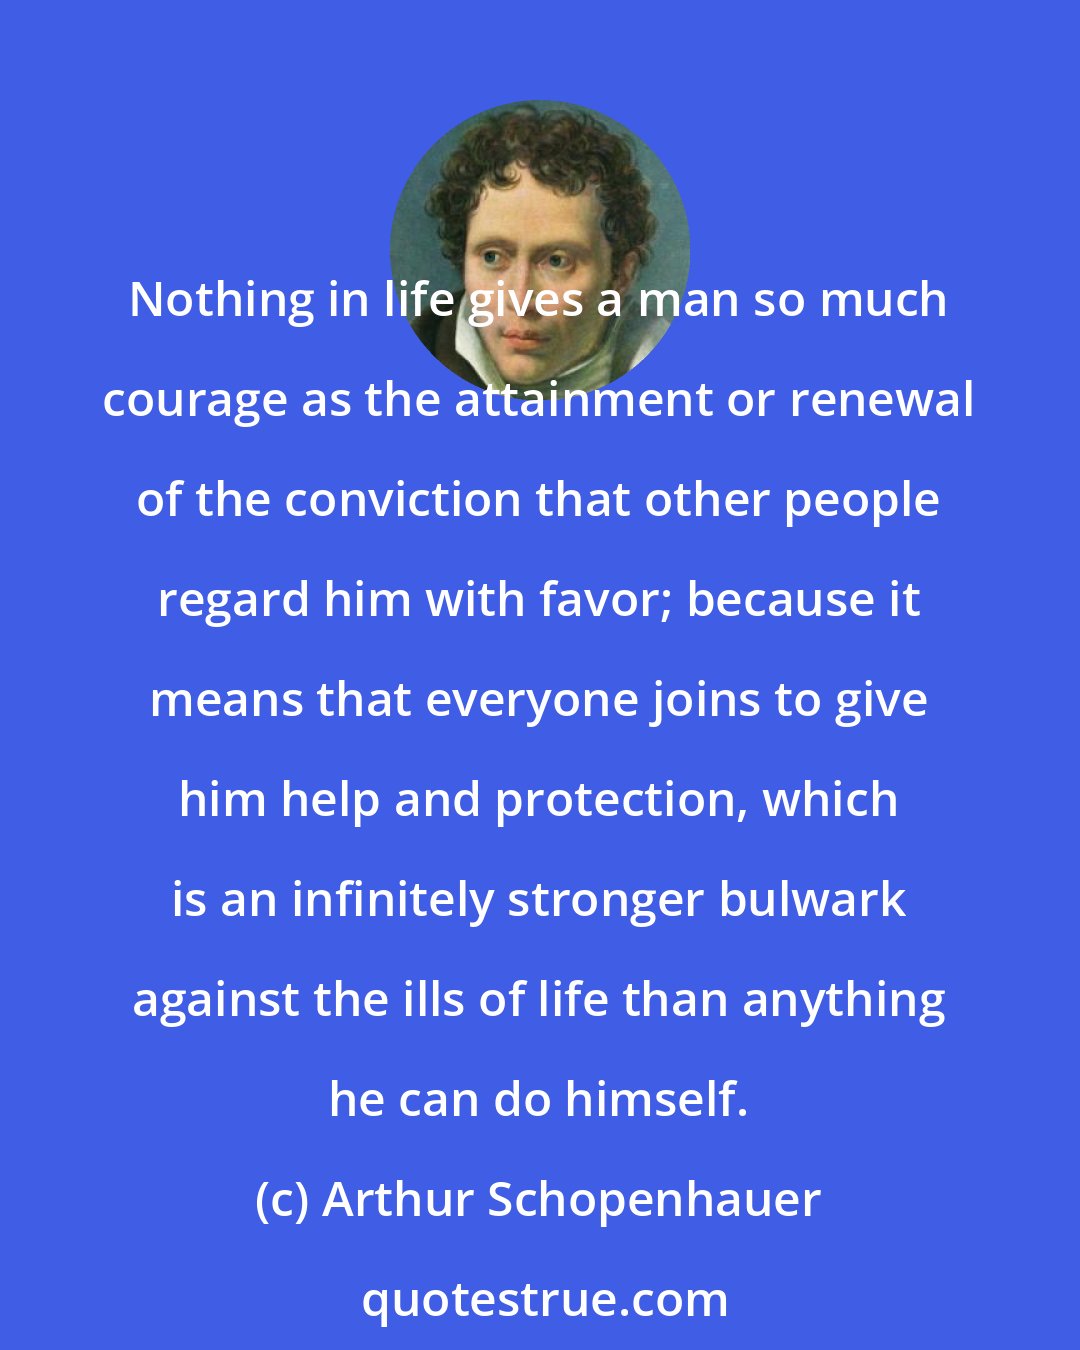 Arthur Schopenhauer: Nothing in life gives a man so much courage as the attainment or renewal of the conviction that other people regard him with favor; because it means that everyone joins to give him help and protection, which is an infinitely stronger bulwark against the ills of life than anything he can do himself.